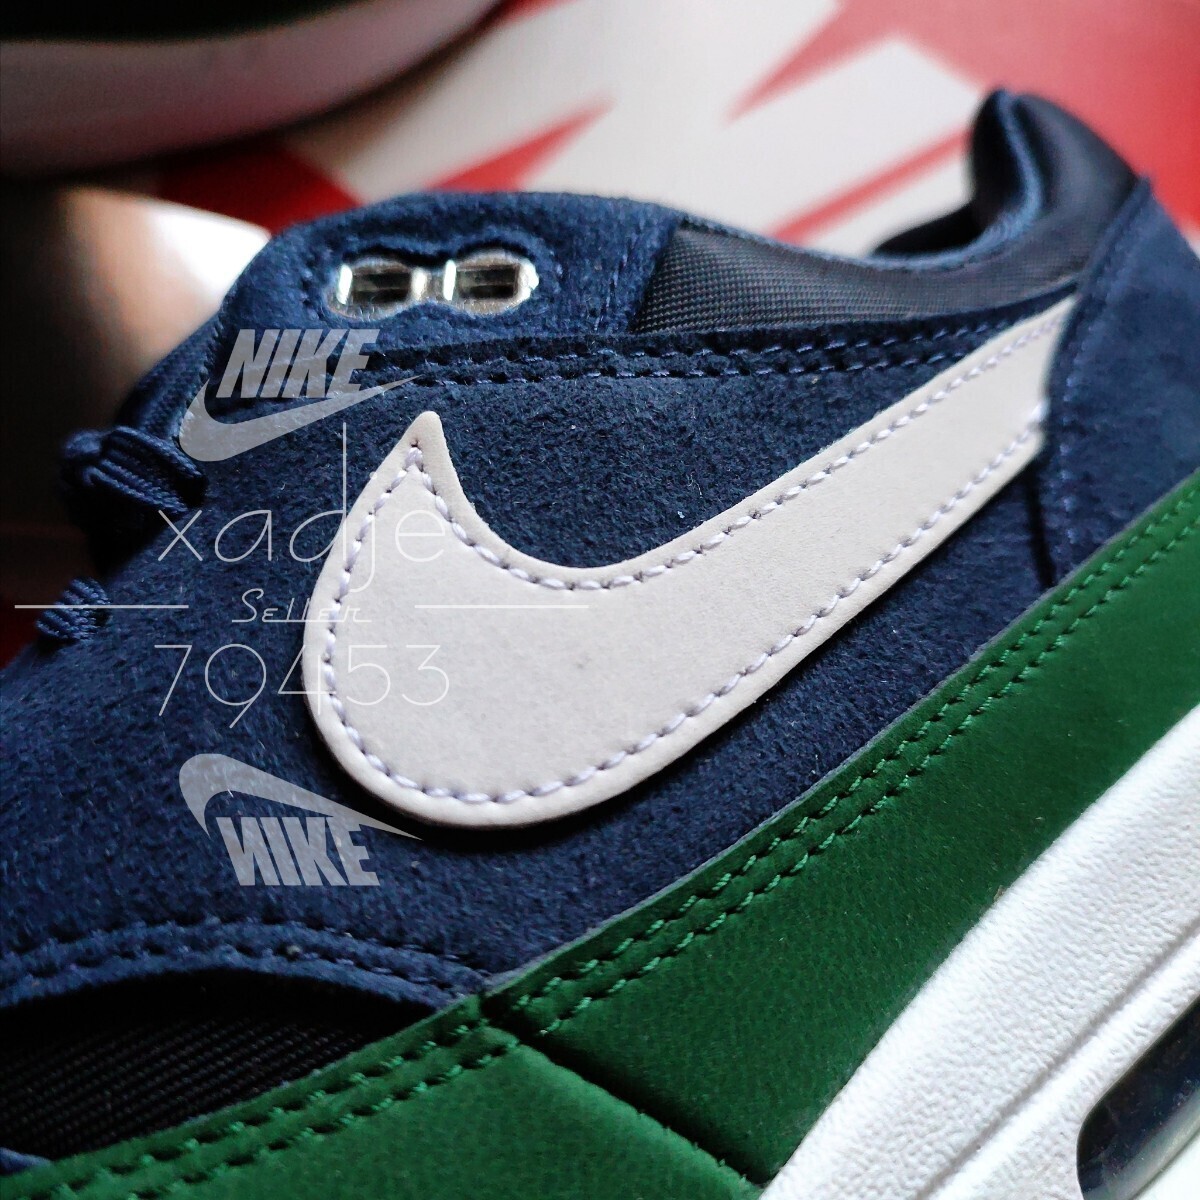  new goods regular goods NIKE Nike AIR MAX1 air max 1 low navy blue navy green green black white WMNS 27cm ( real quality 26~26.5cm) US10 box attaching 